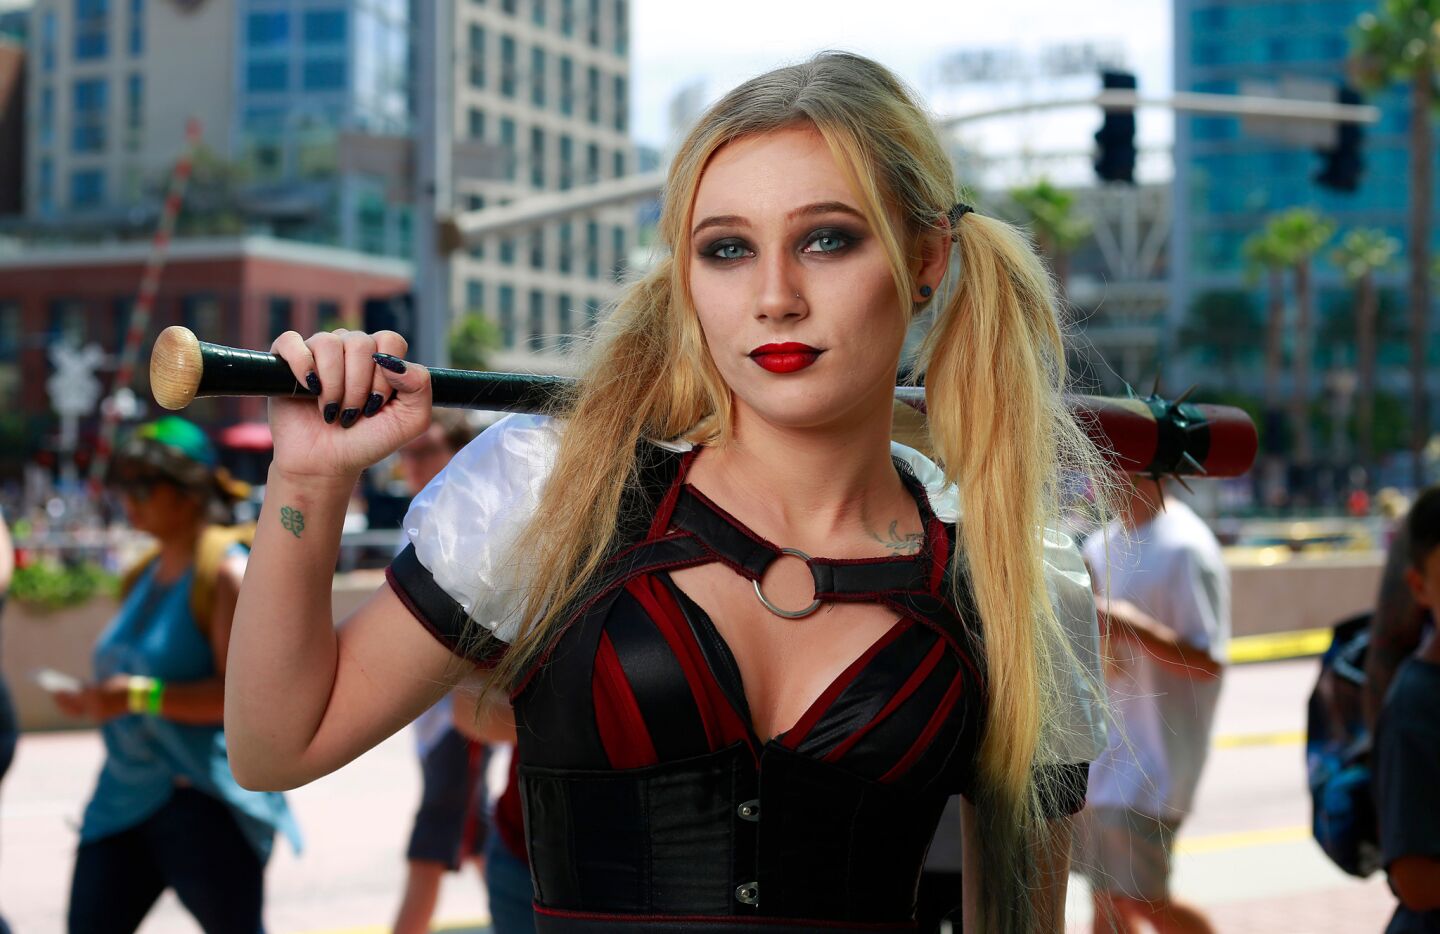 Jay Voltage of Los Angeles dressed as Harley Quinn at Comic-Con in San Diego on July 20.